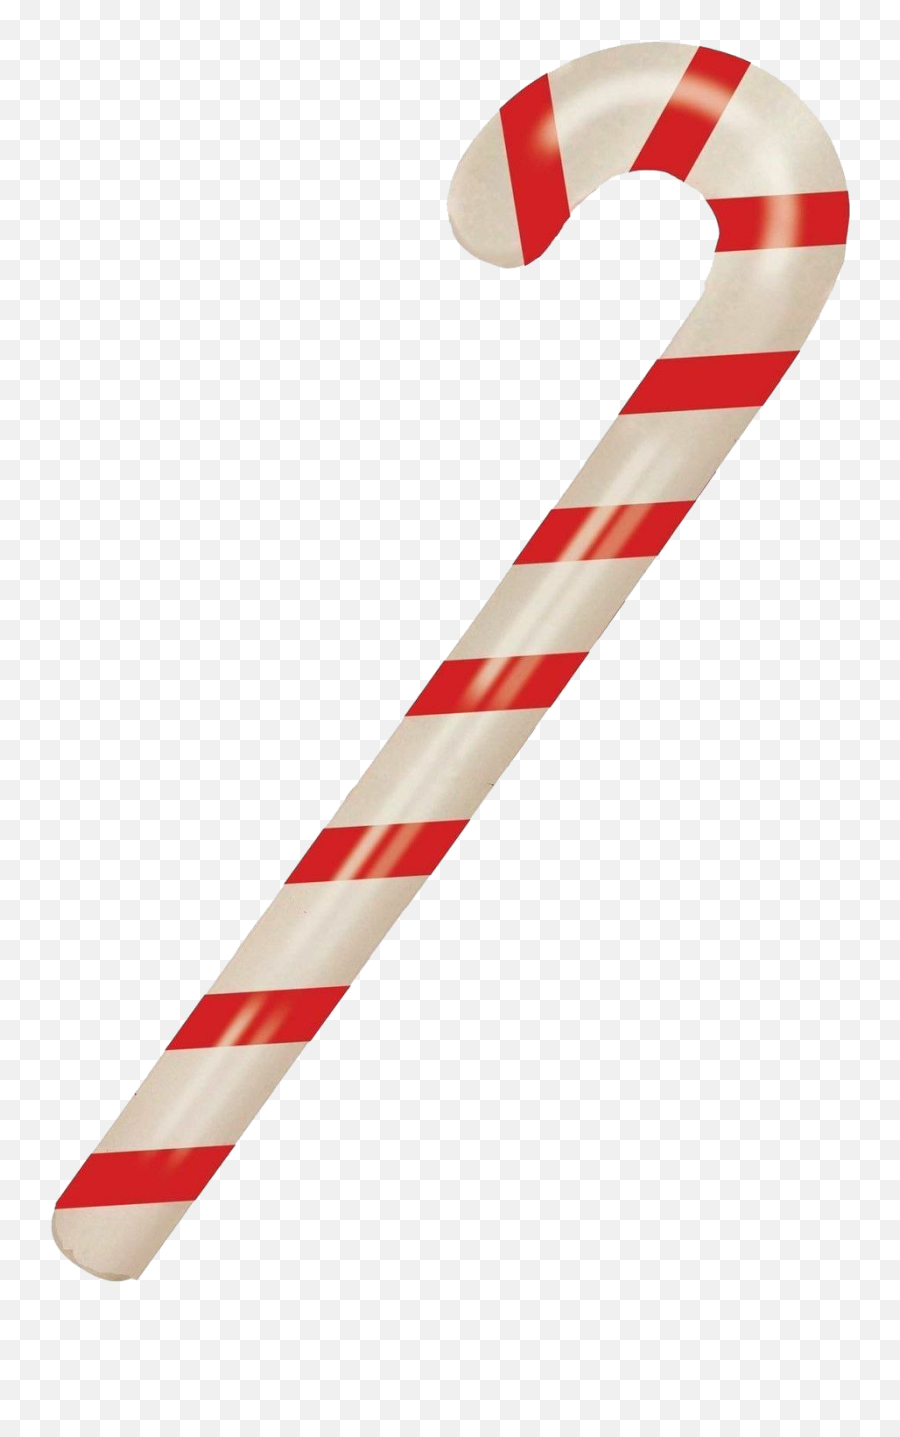 Peppermint Candy Cane Png Image - Kerst Snoep Stok Emoji,Candy Cane Png